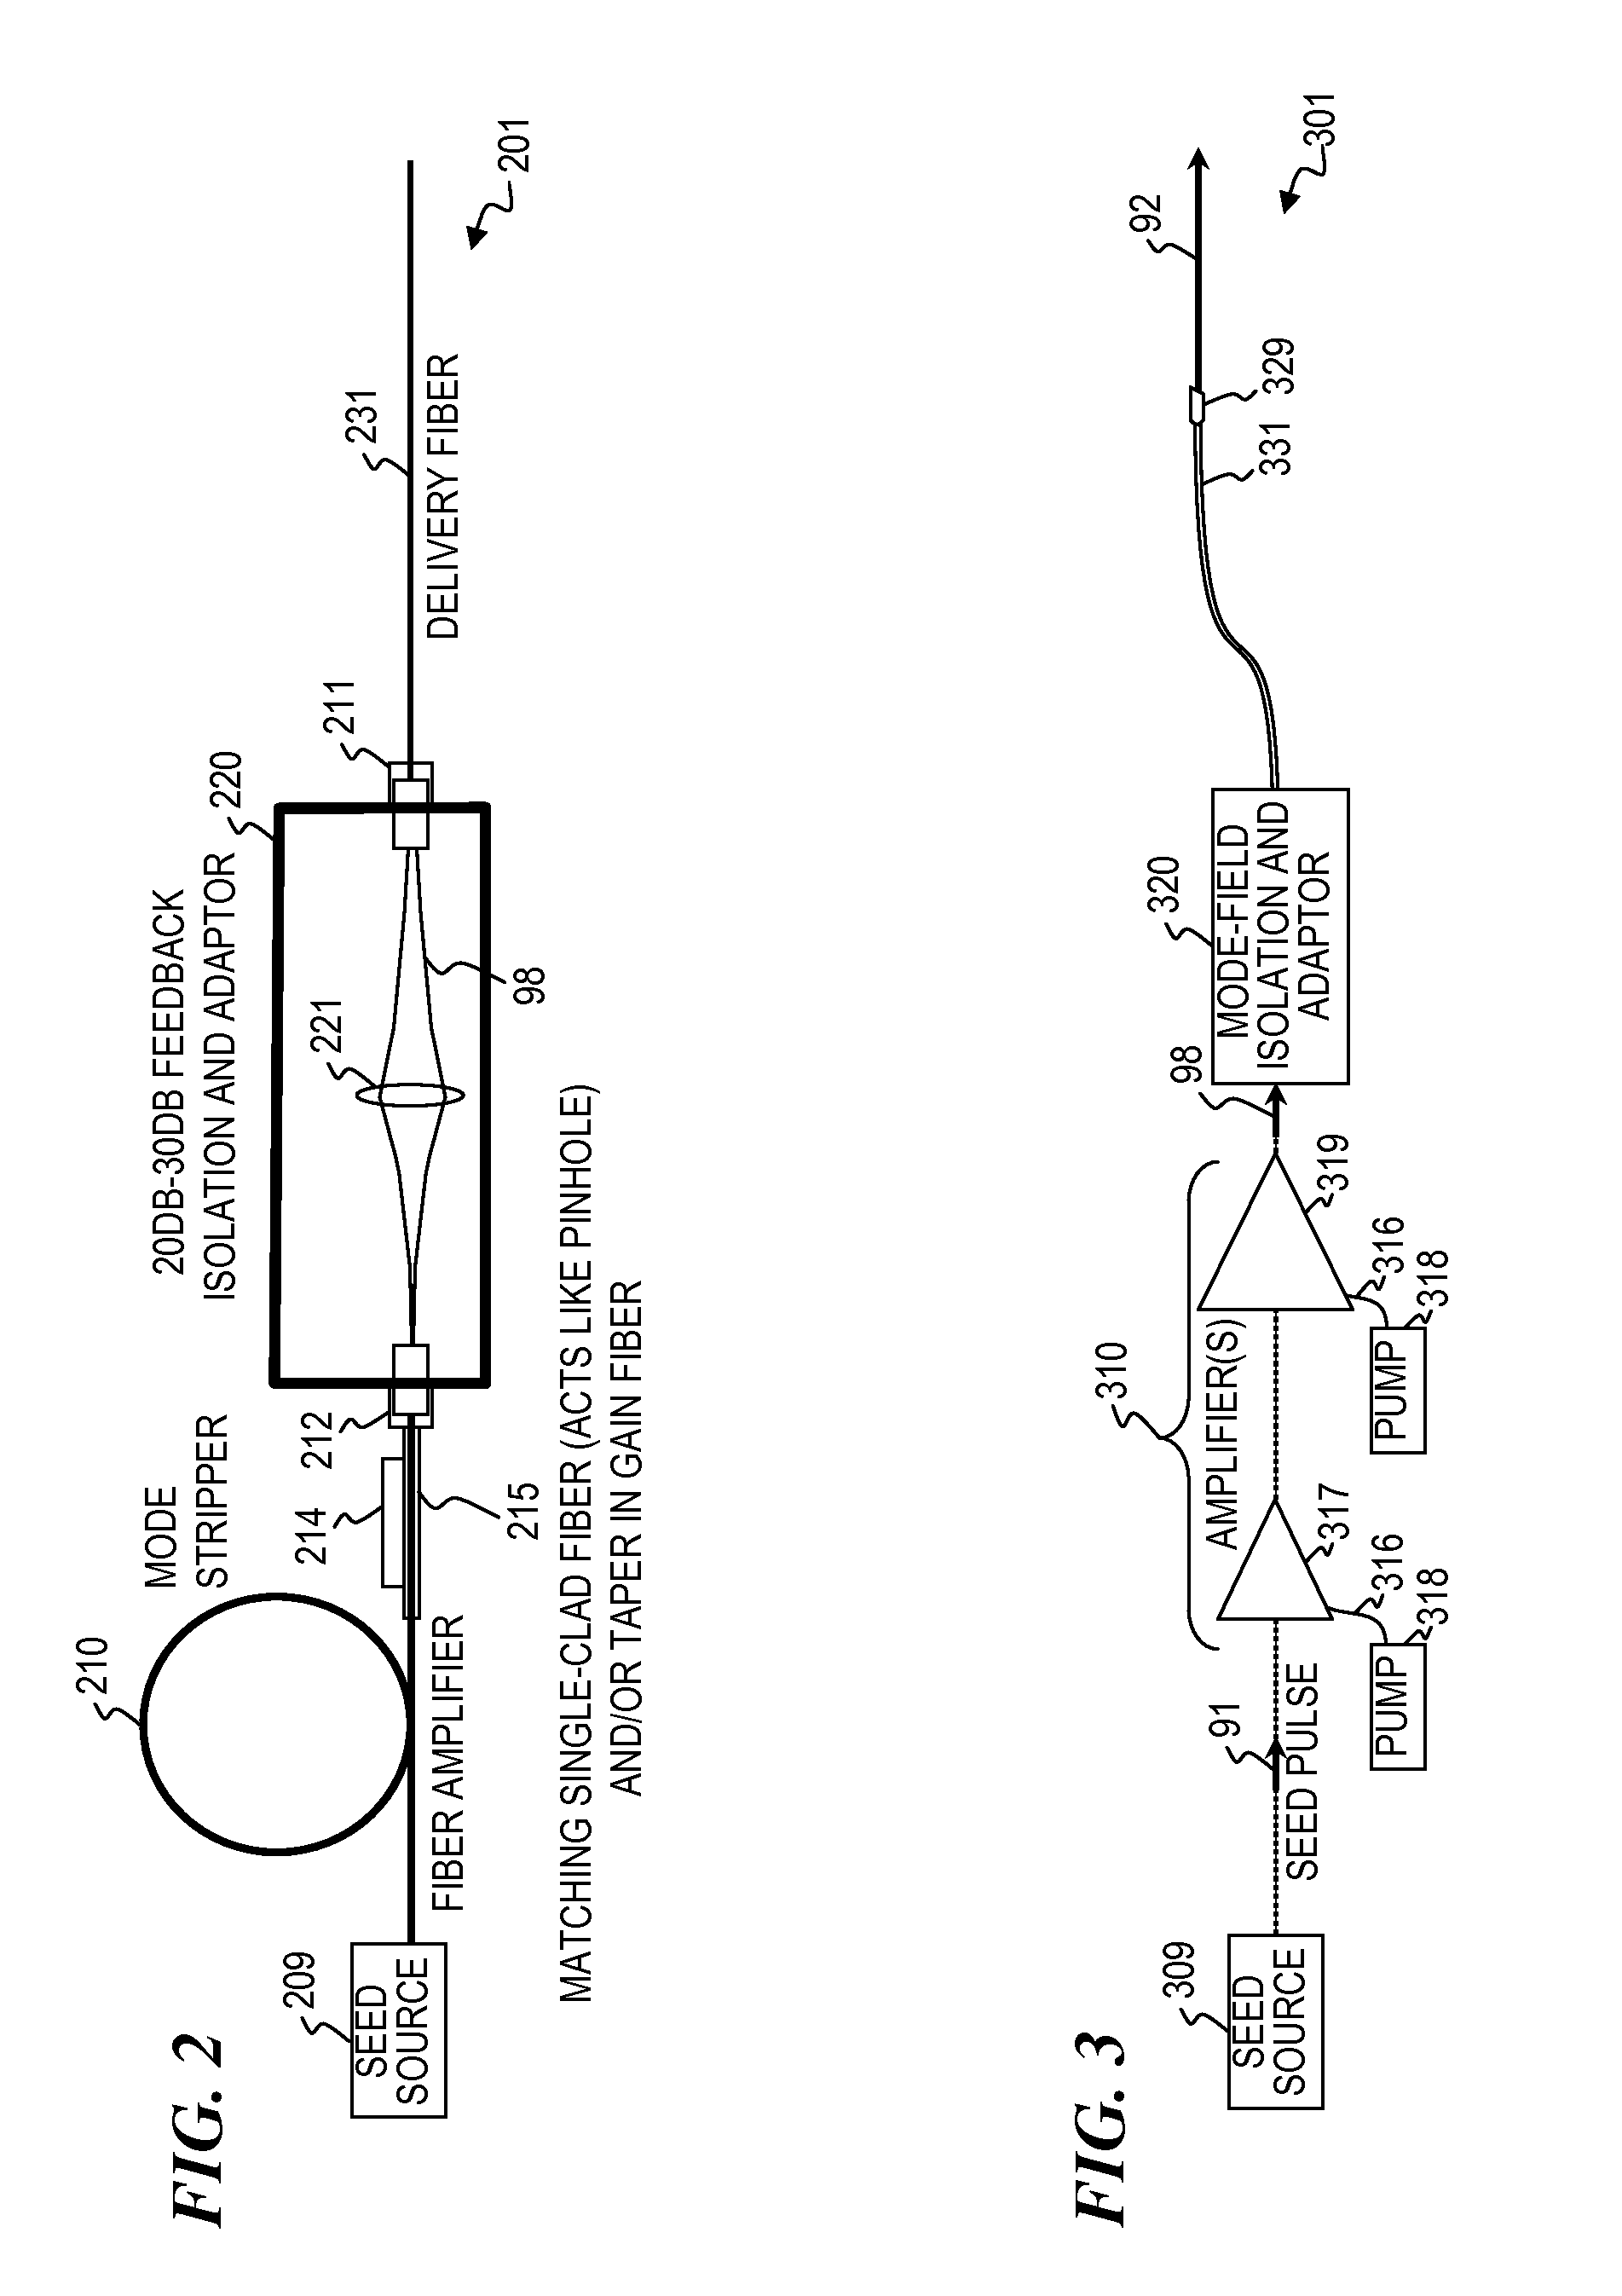 High-power laser system having delivery fiber with non-circular cross section for isolation against back reflections